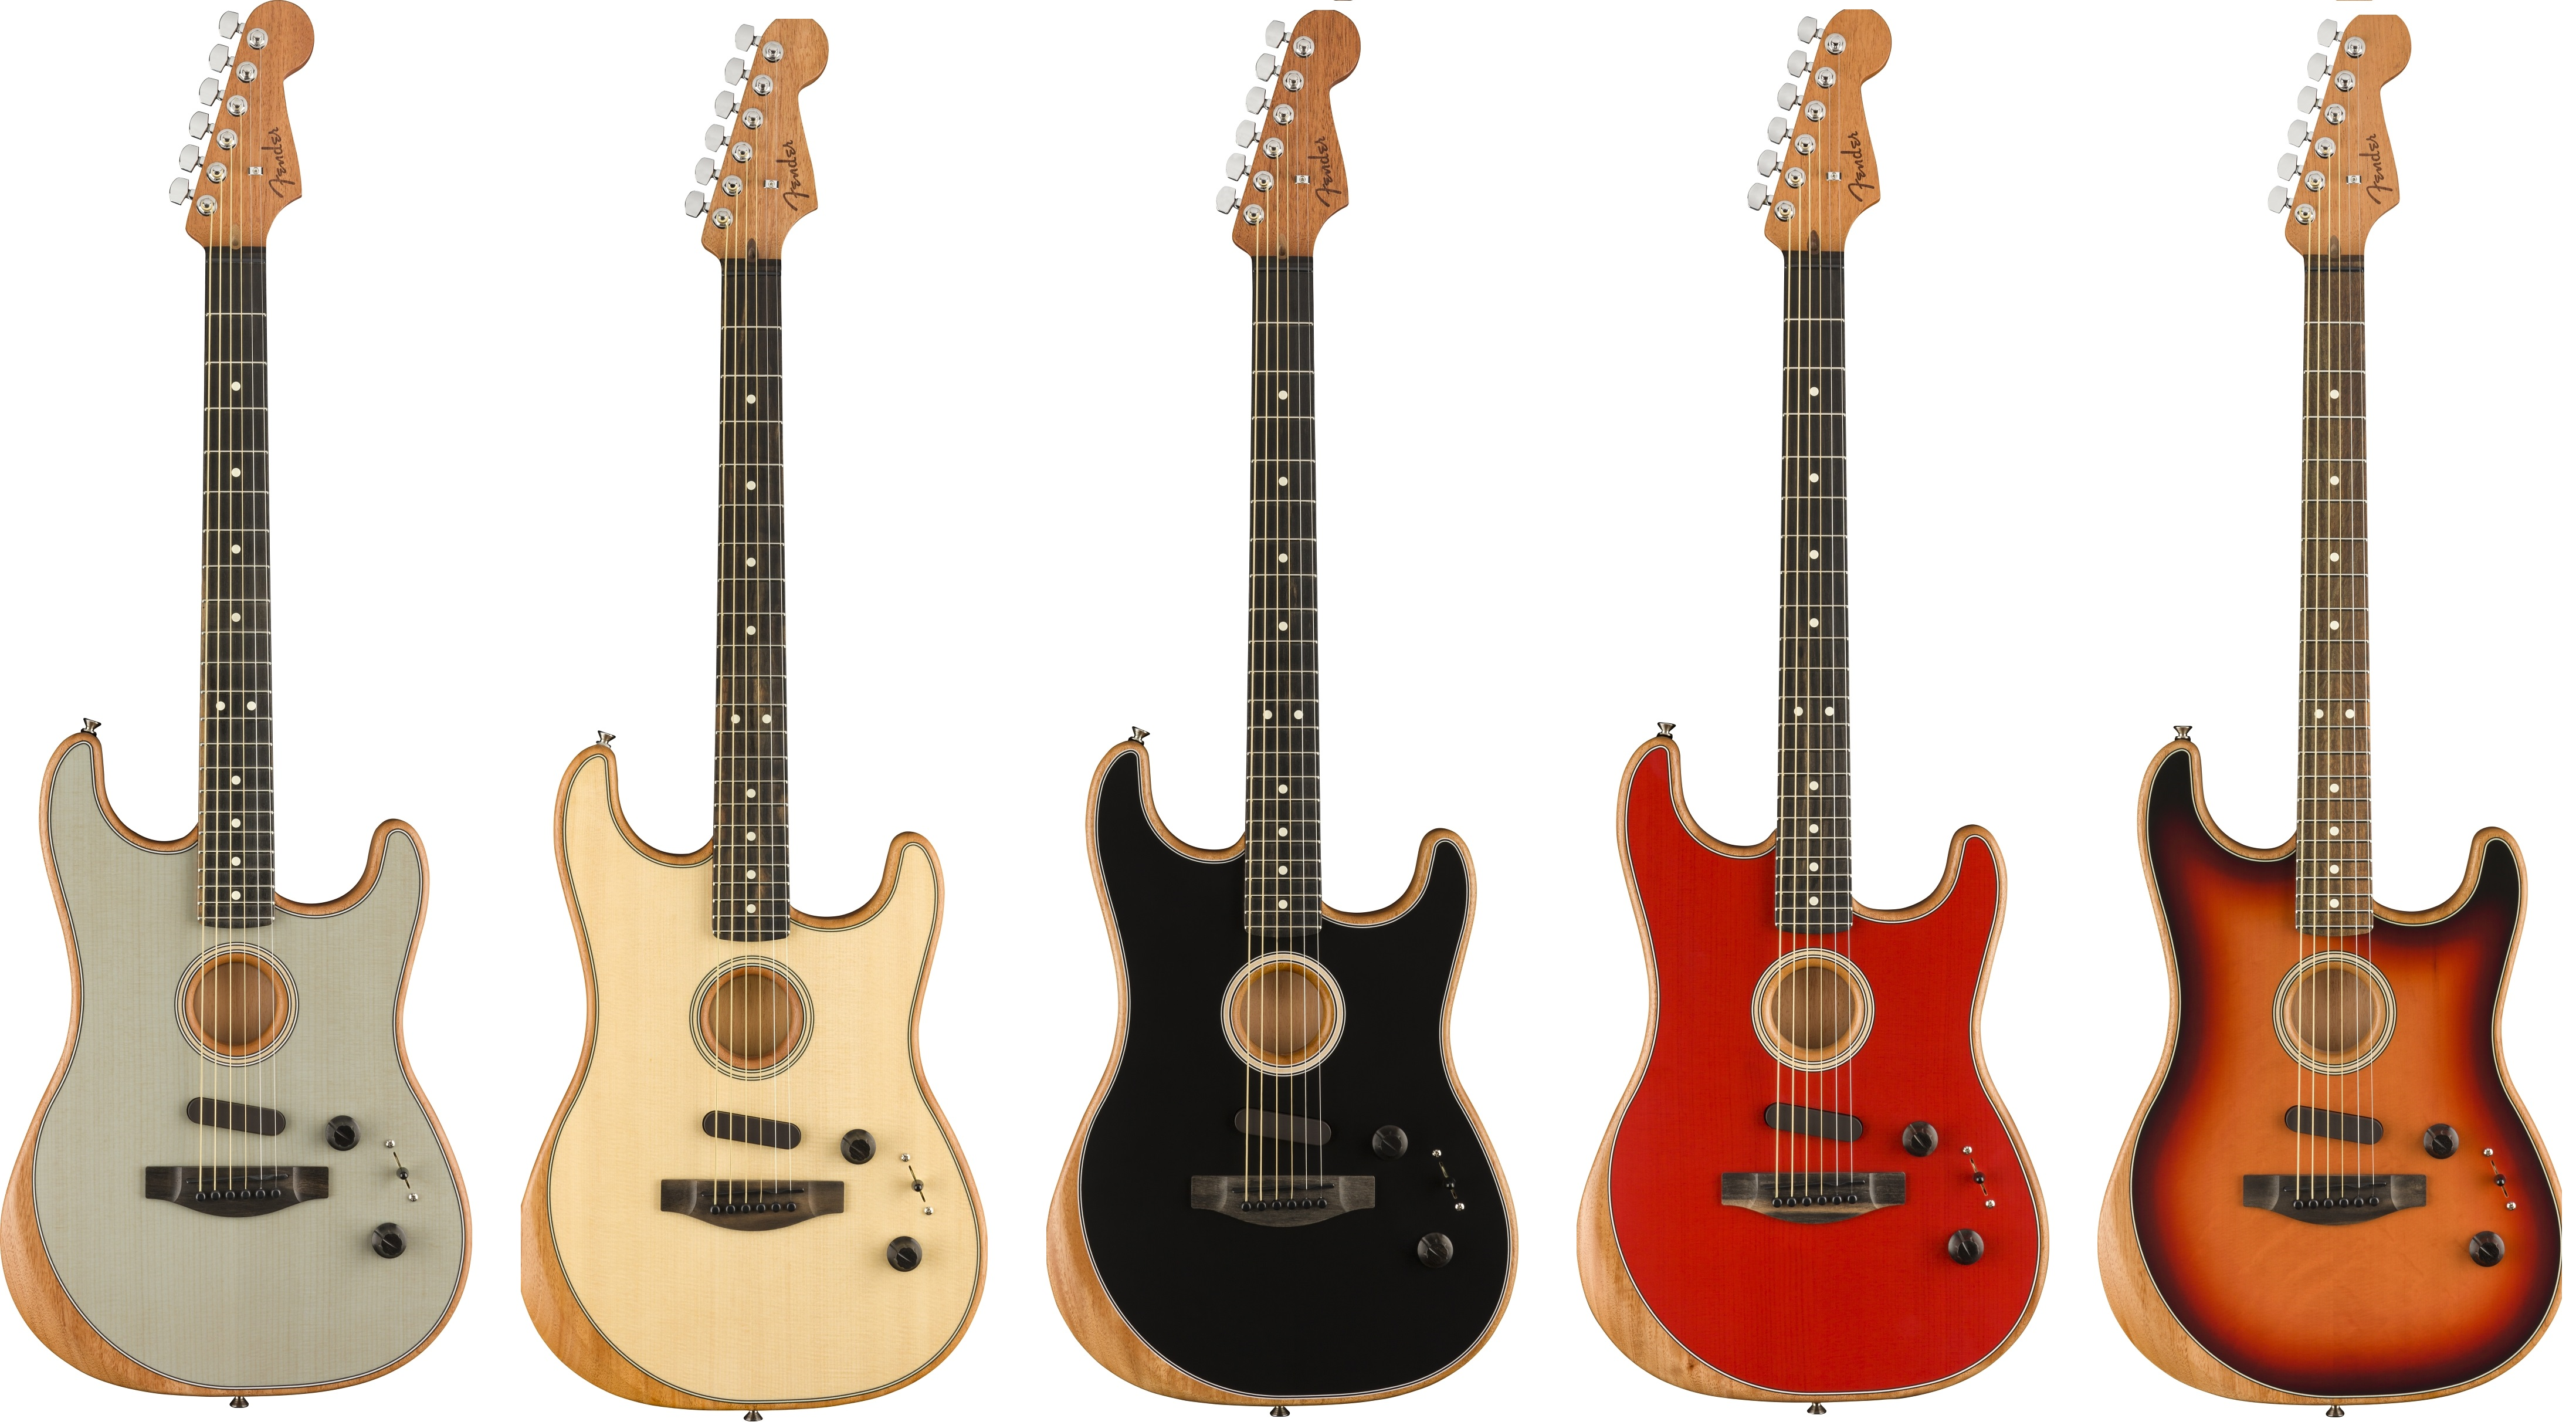 Fender American Acoustasonic Stratocaster colors available